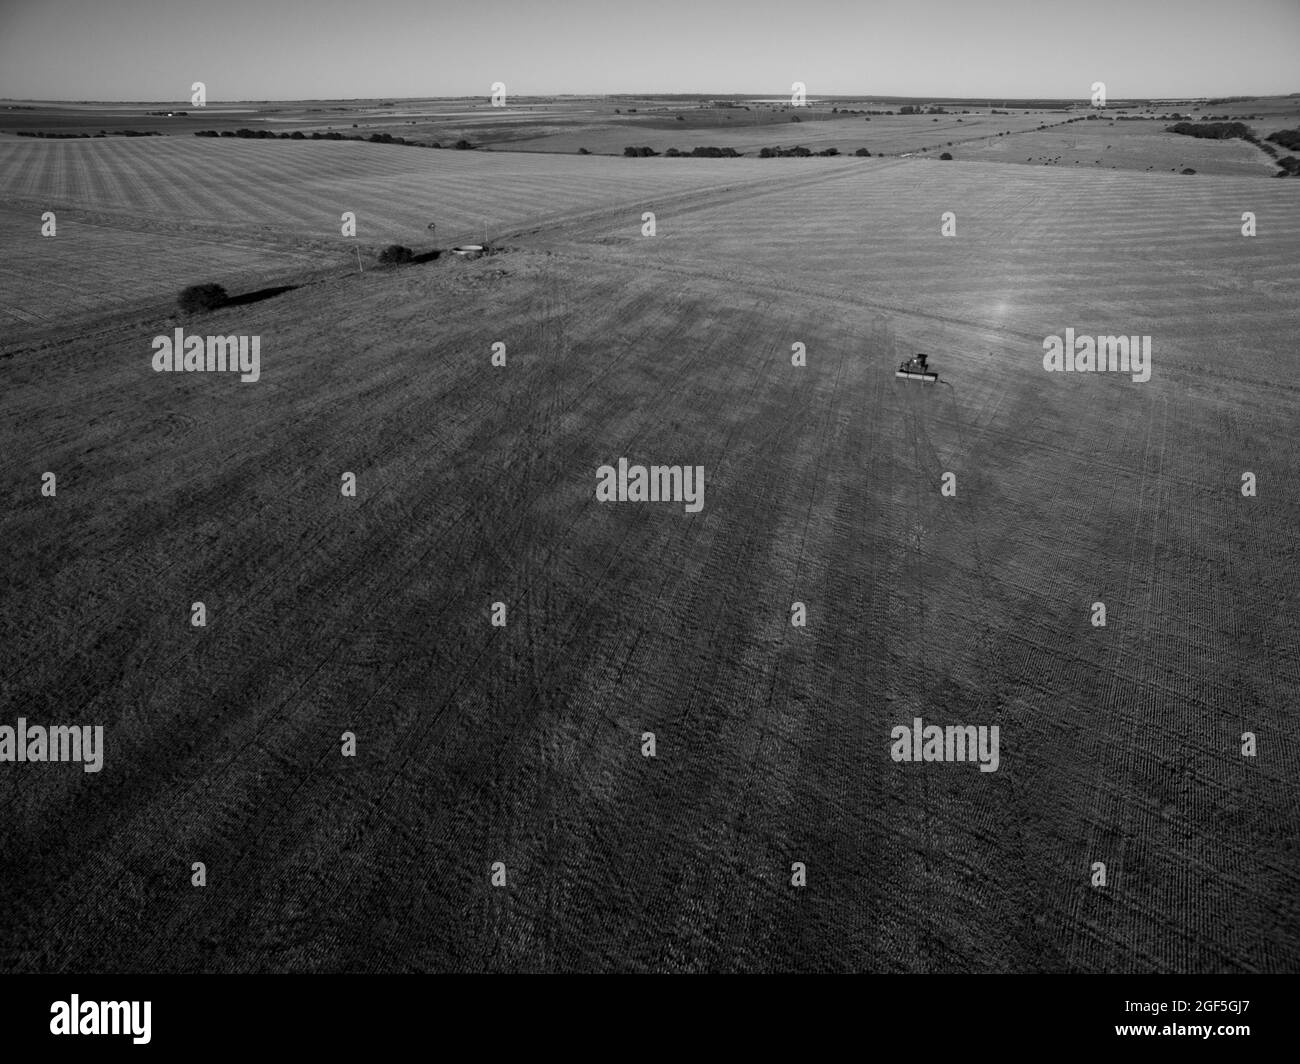 Aerial View of sown field in the Argentine countryside, Pampas province, Patagonia, Argentina. Stock Photo